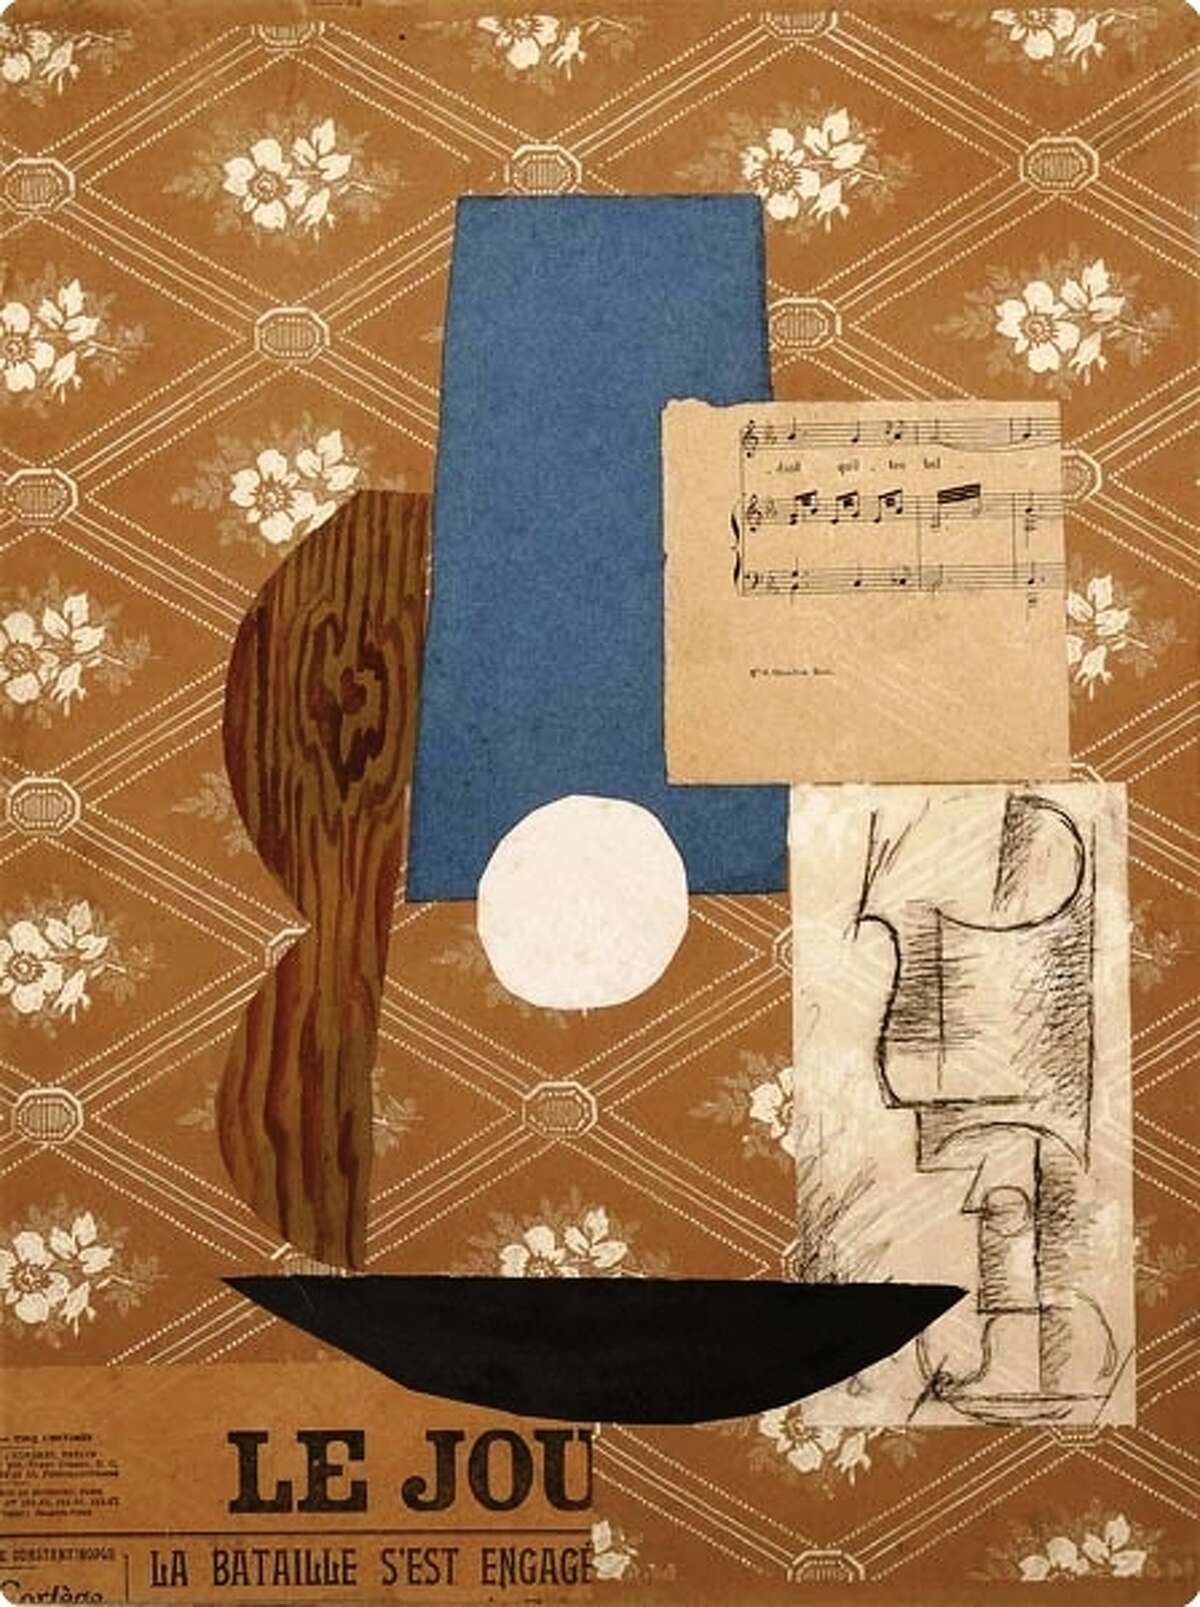 Picasso's 1912 masterpiece "Guitar and Wine Glass" is the centerpiece of "A Century of Collage" at the McNay Art Museum.